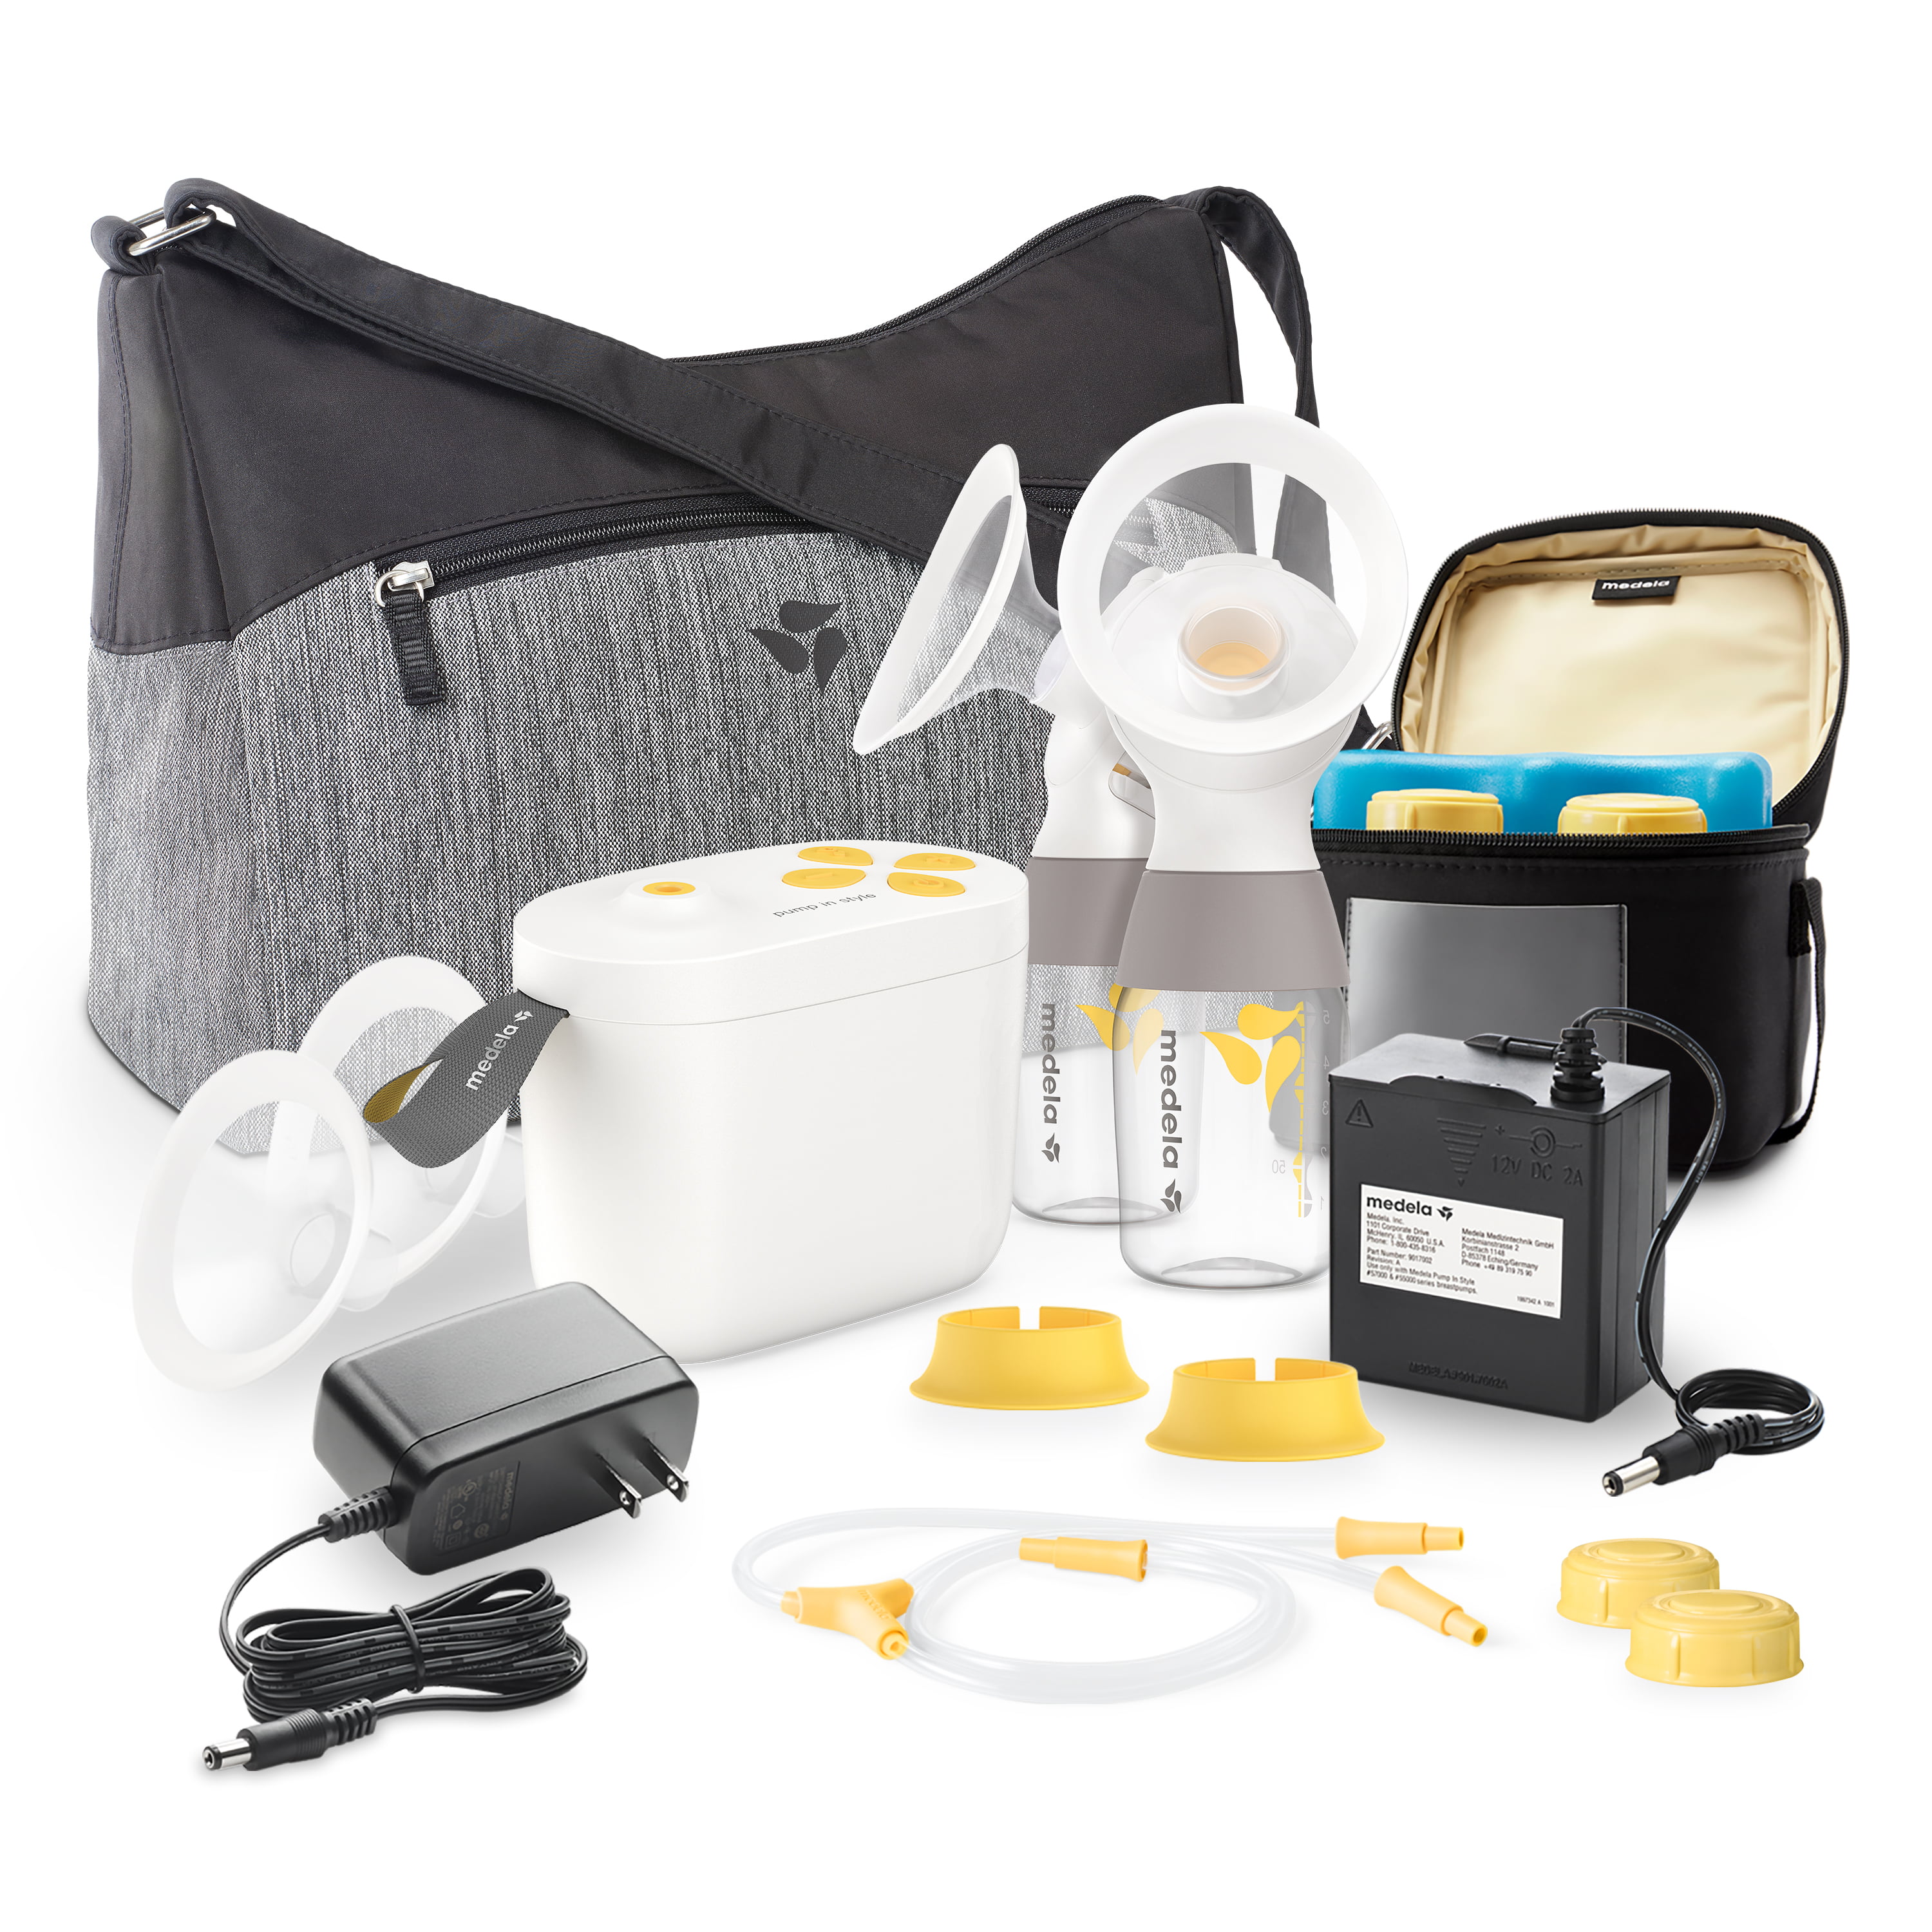 New Medela Pump In Style with MaxFlow Double Electric ...